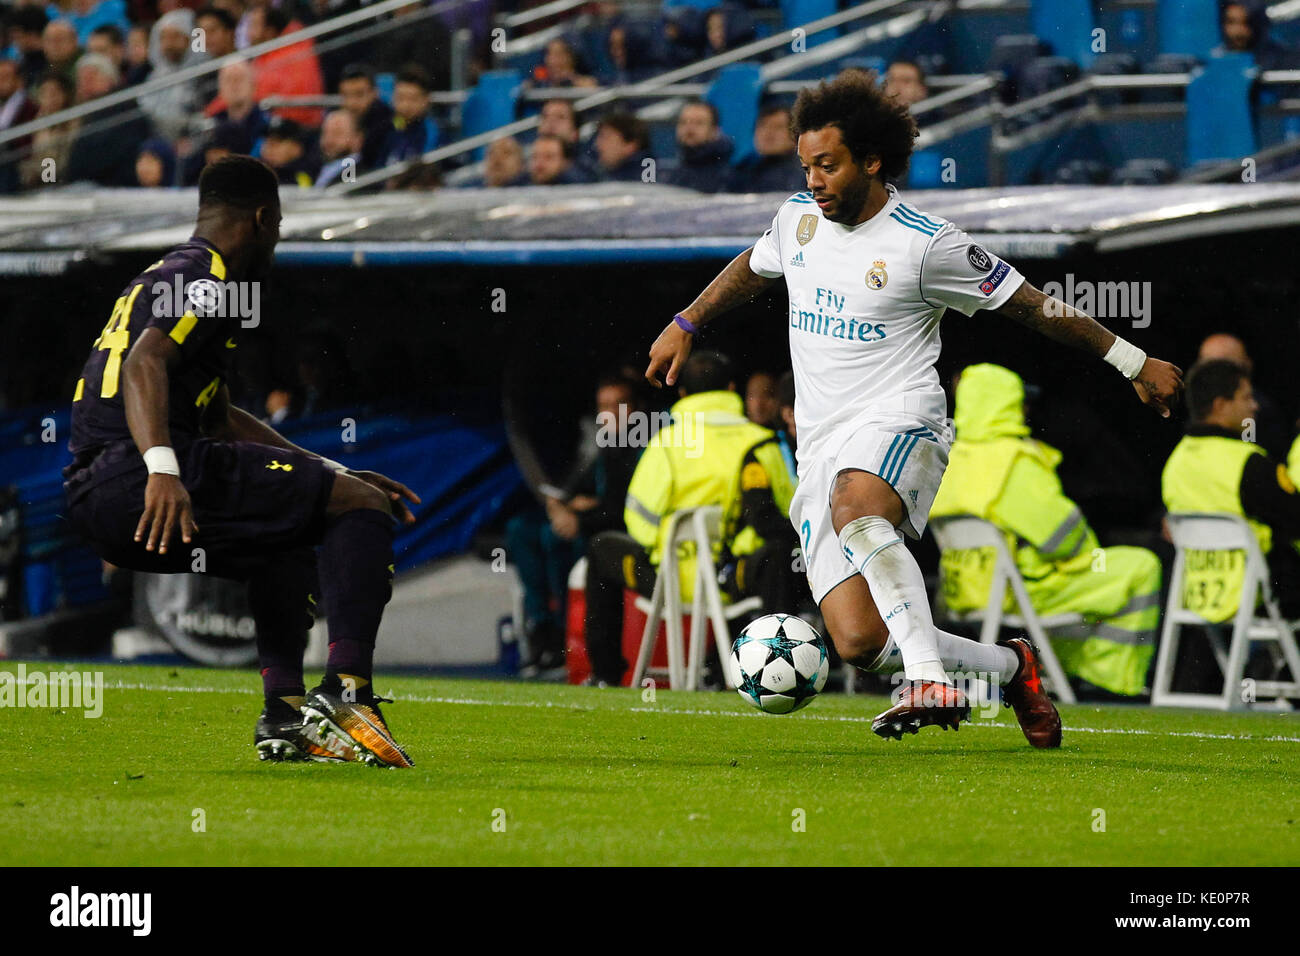 Madrid, Spain. 17th October, 2017. Marcelo Viera da Silva (12) Real Madrid's player. Serge Aurier (24) Tottenham Hotspur F.C.'s player. UCL Champions League between Real Madrid vs Tottenham Hotspur F.C. at the Santiago Bernabeu stadium in Madrid, Spain, October 17, 2017 . Credit: Gtres Información más Comuniación on line, S.L./Alamy Live News Stock Photo